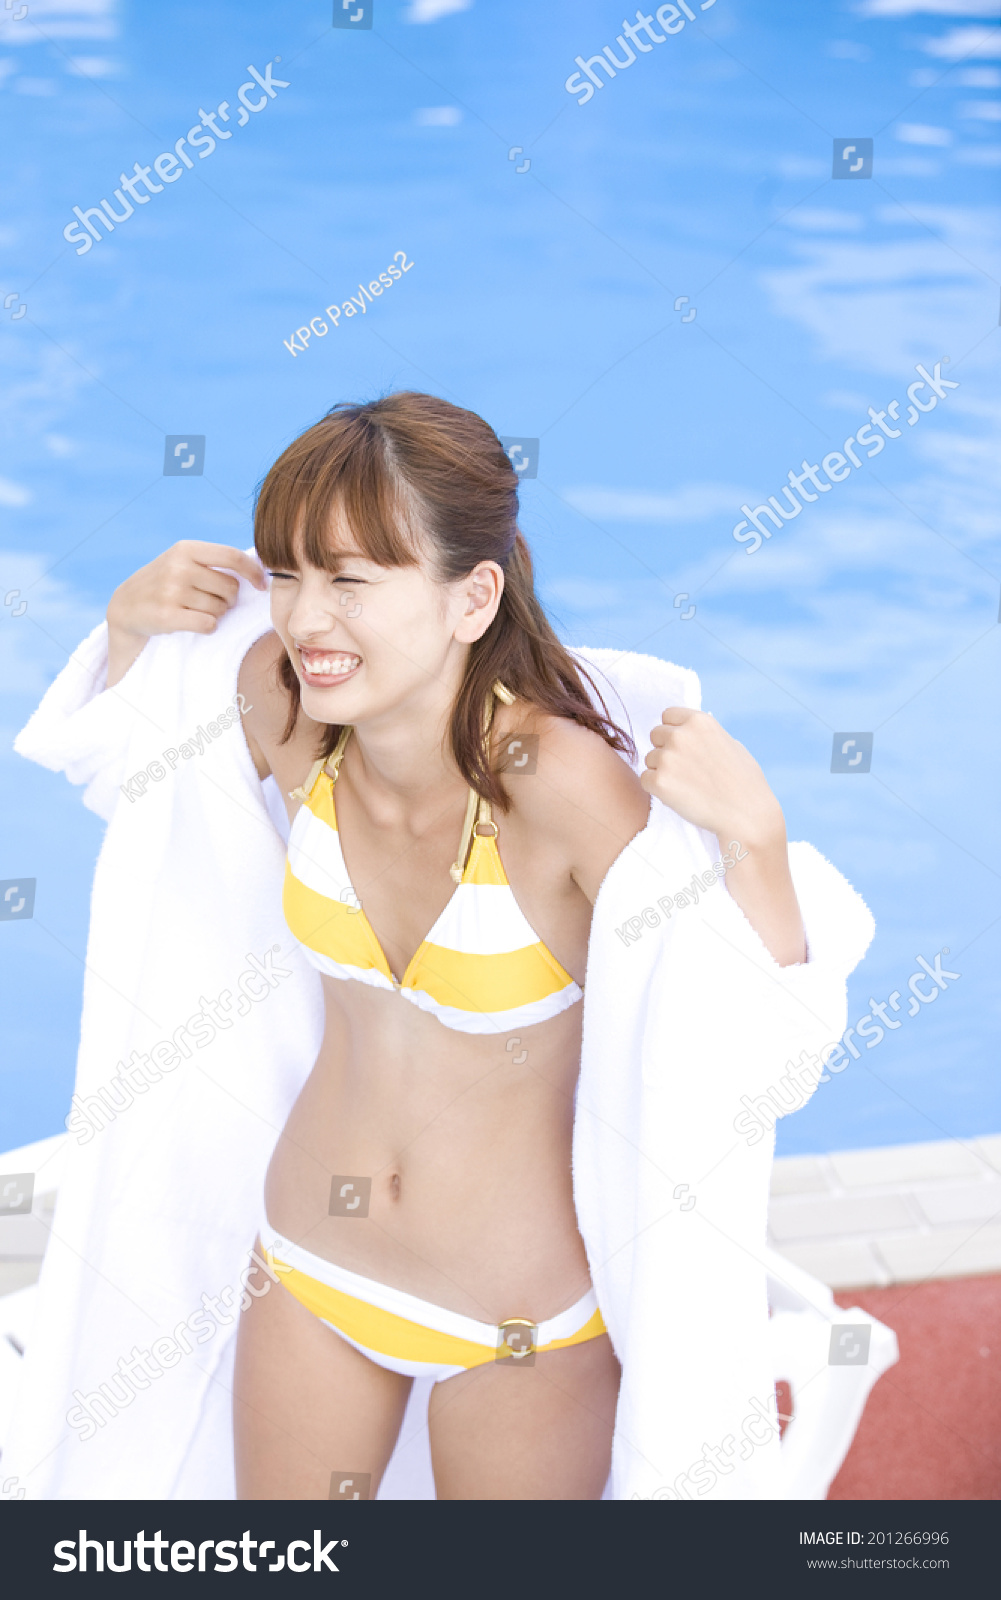 bob okeefe recommends Girl Takes Off Bathing Suit